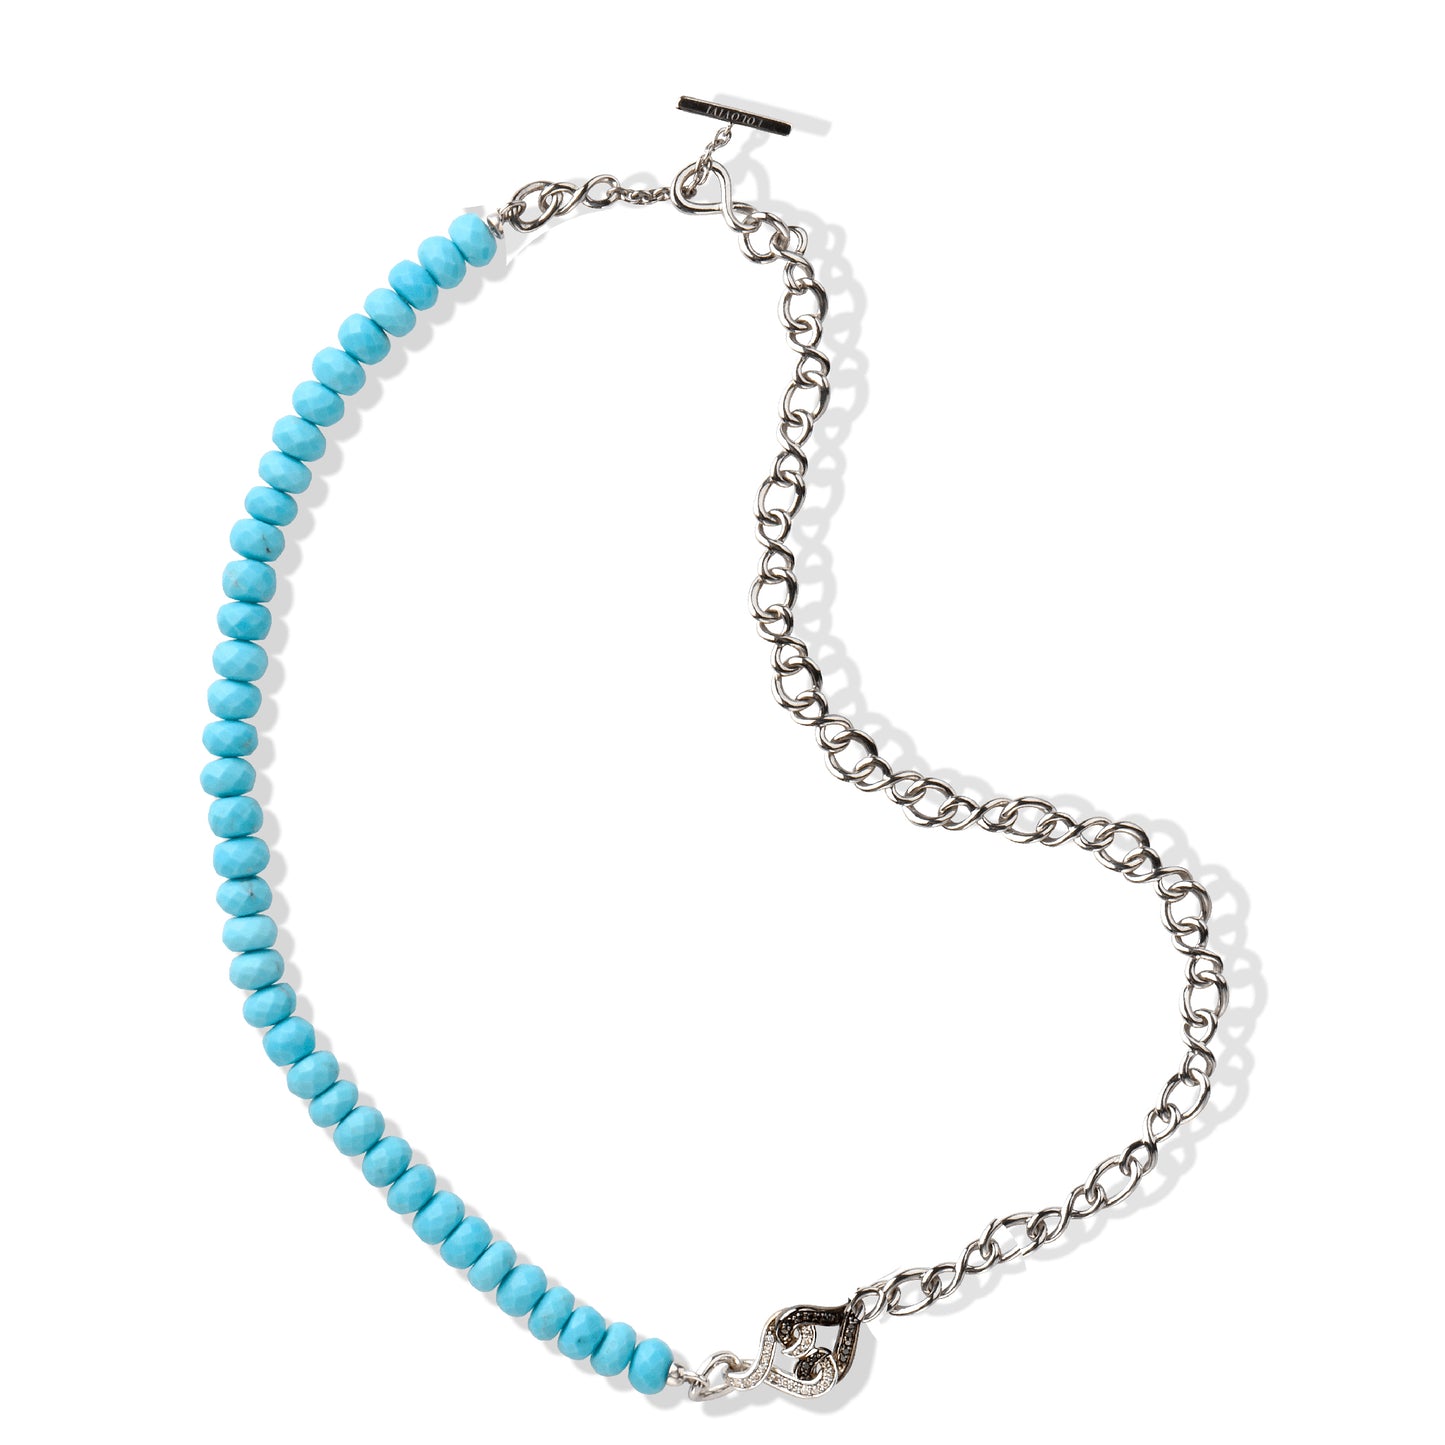 Sterling Silver Turquoise White and Black Sapphire Necklace